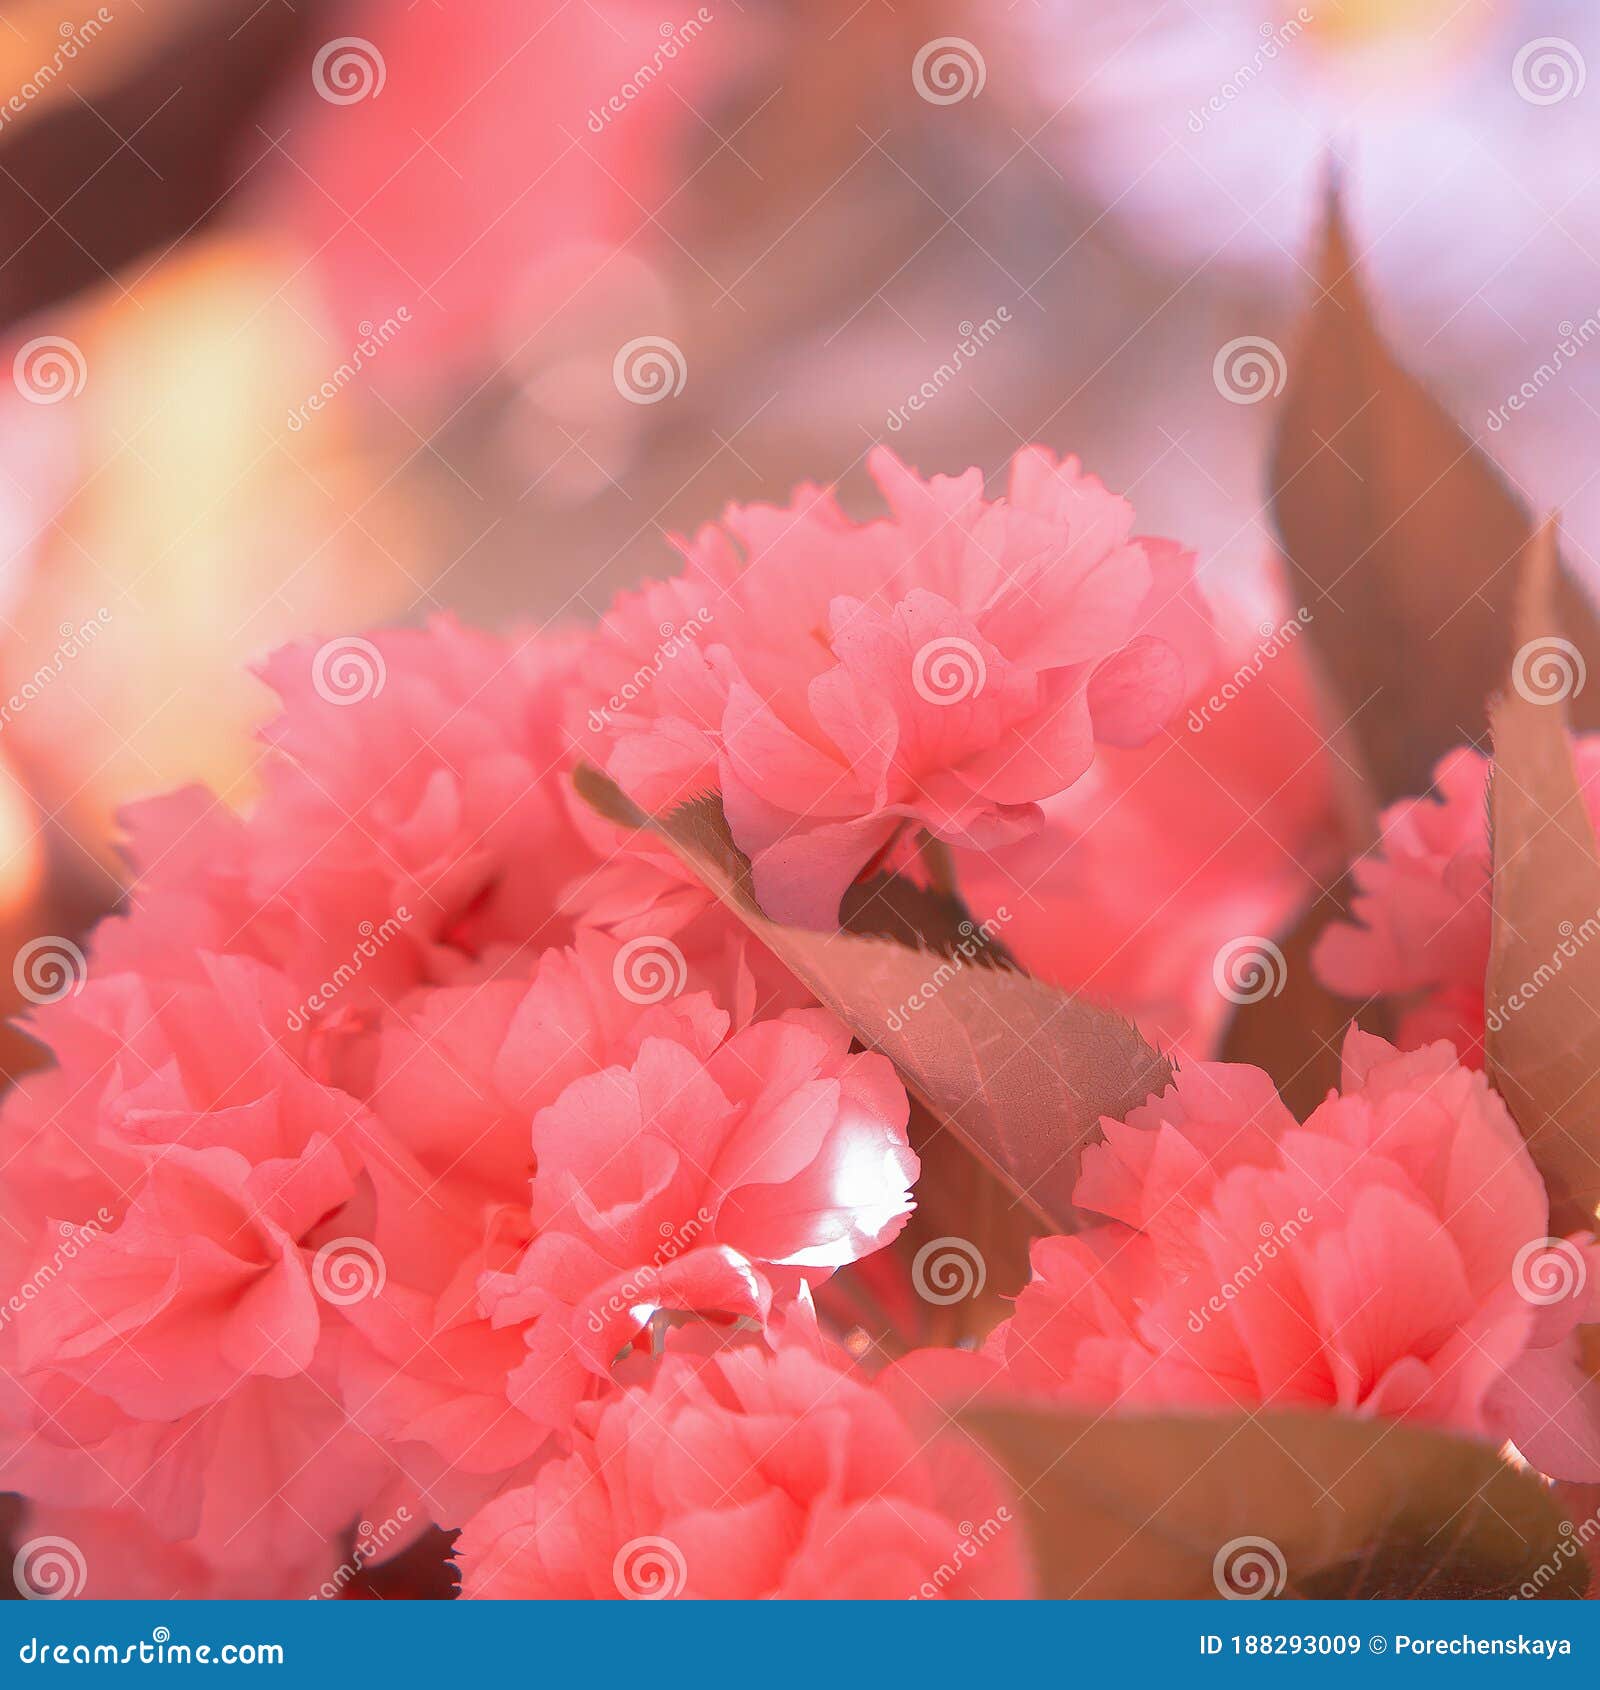 Fashion Aesthetics Pink Flowers. Cherry Blossom Stock Image - Image of  flower, floral: 188293009